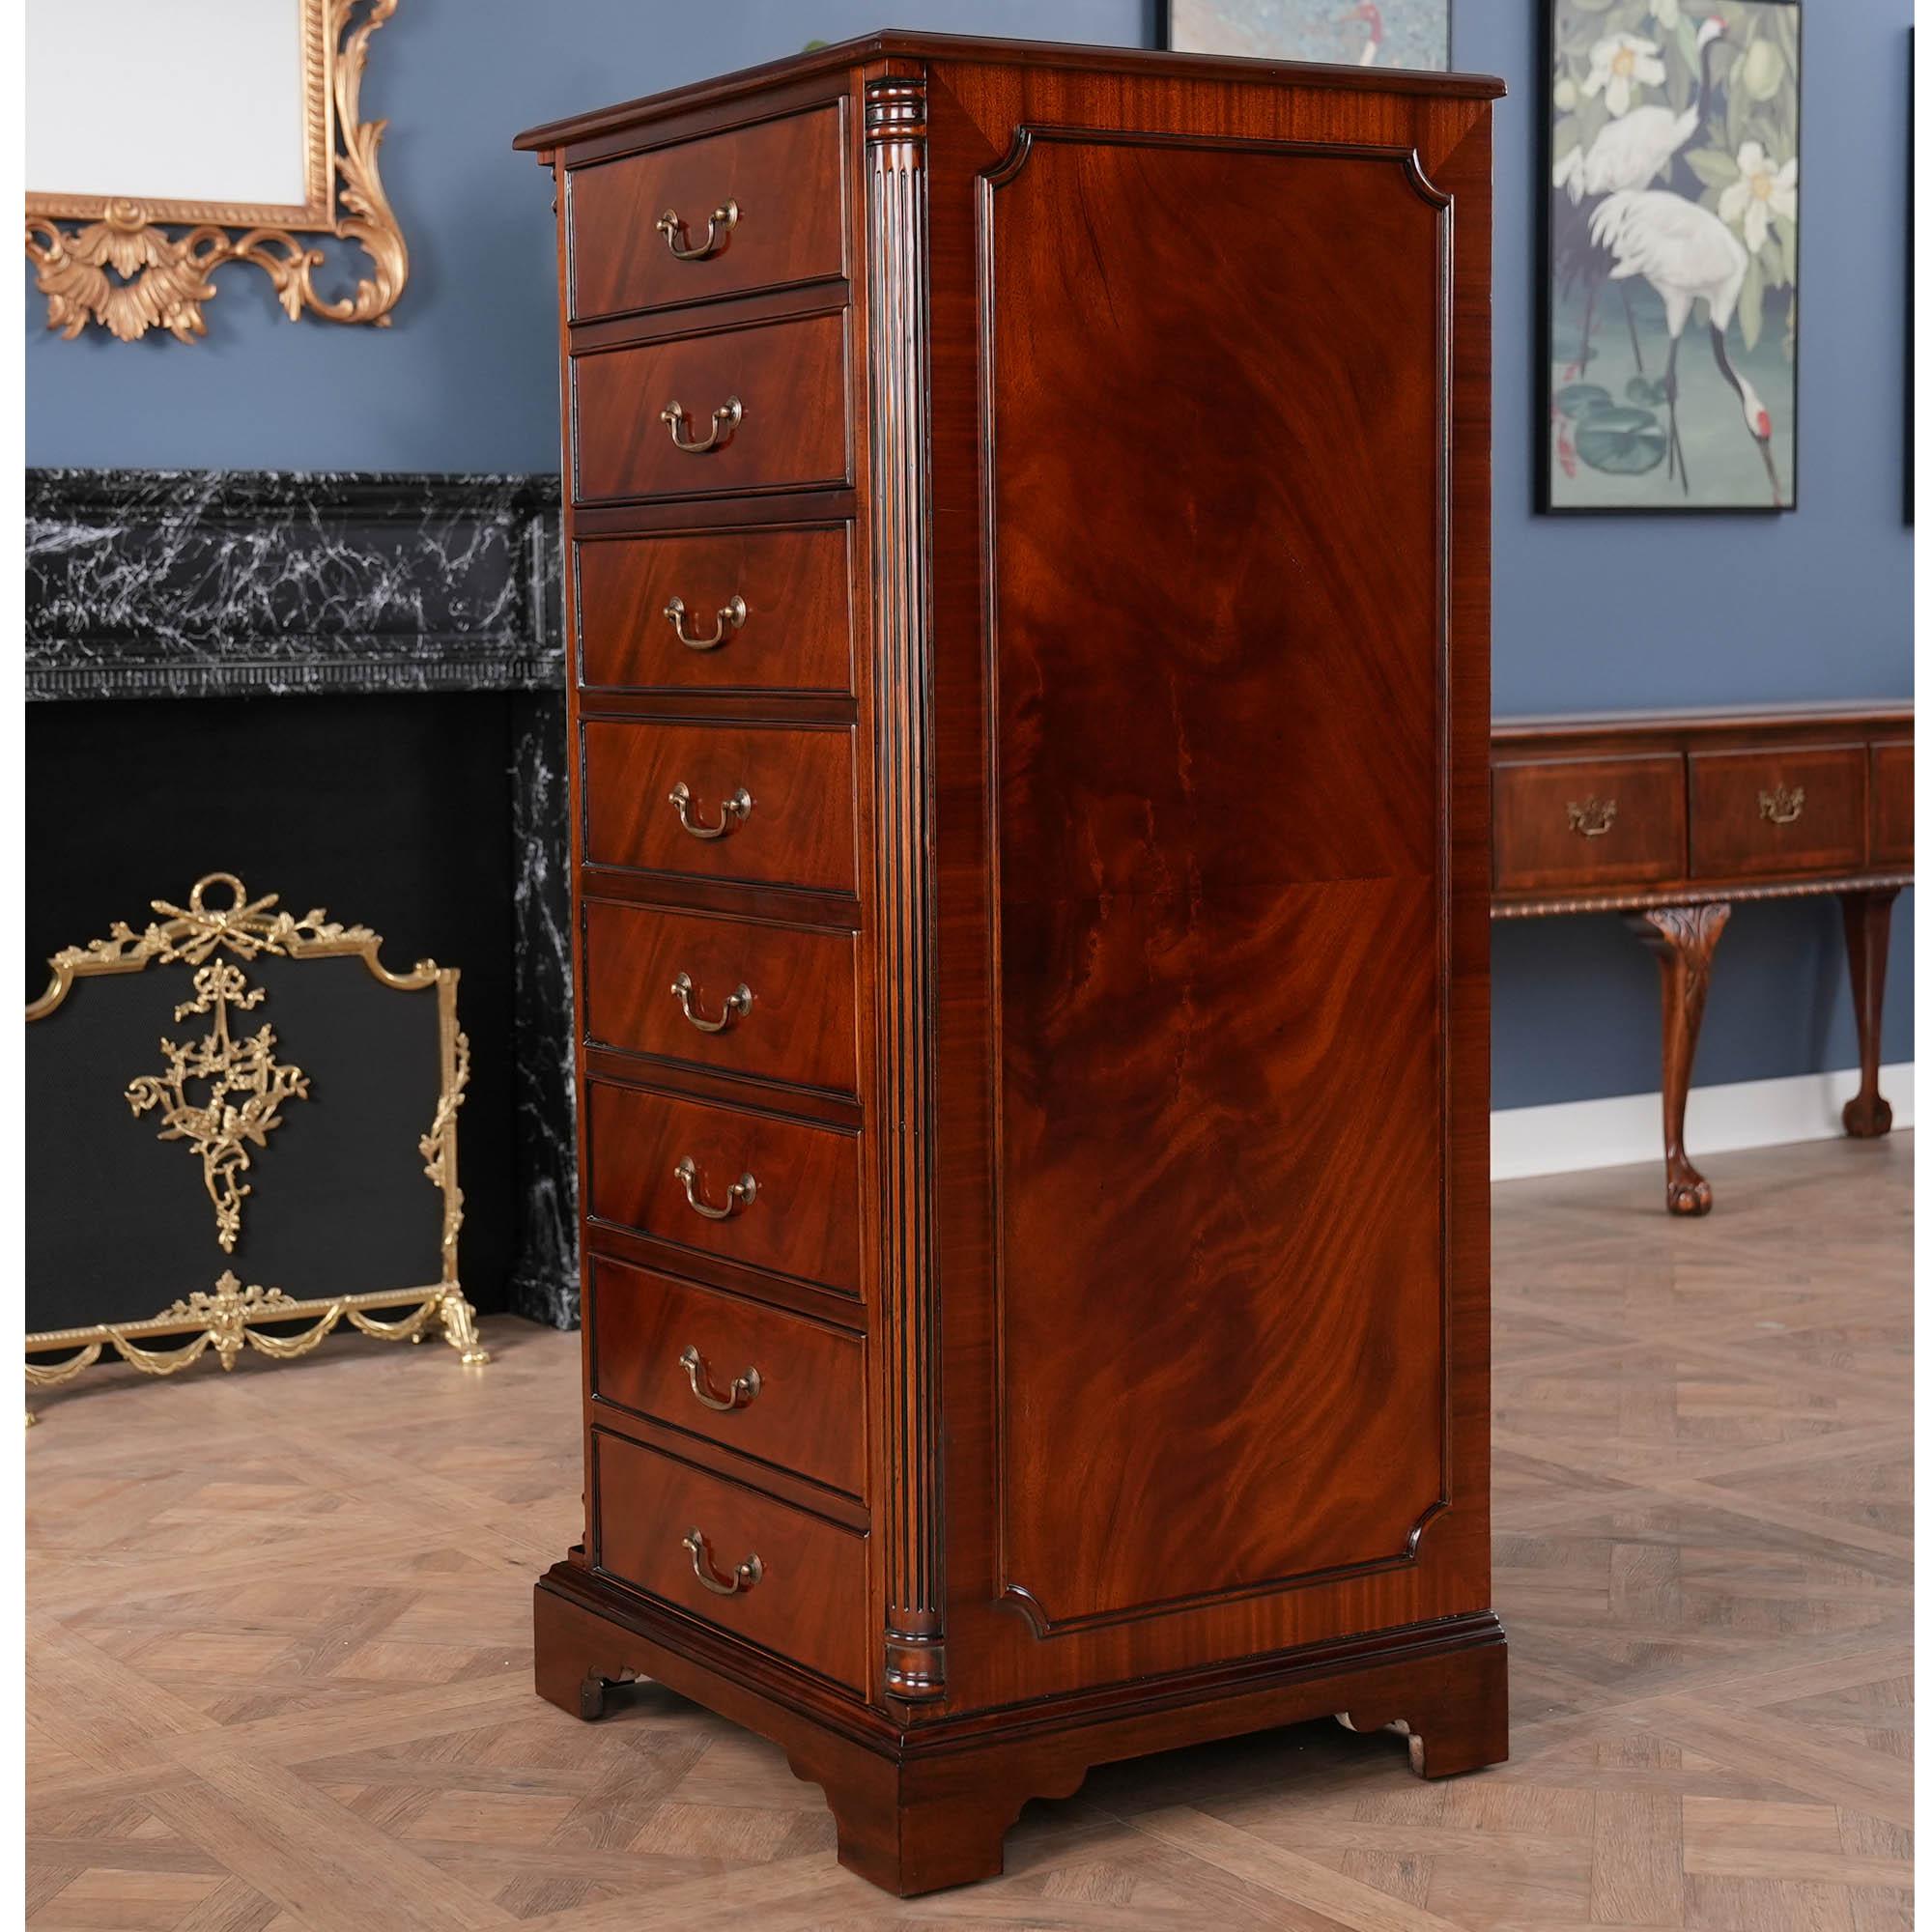 A superb piece of craftsmanship this high quality Mahogany Tall File Cabinet from Niagara Furniture is made with figured mahogany. The edge of the top is a lovely shaped solid mahogany molding. In the front are eight faux drawers, each having